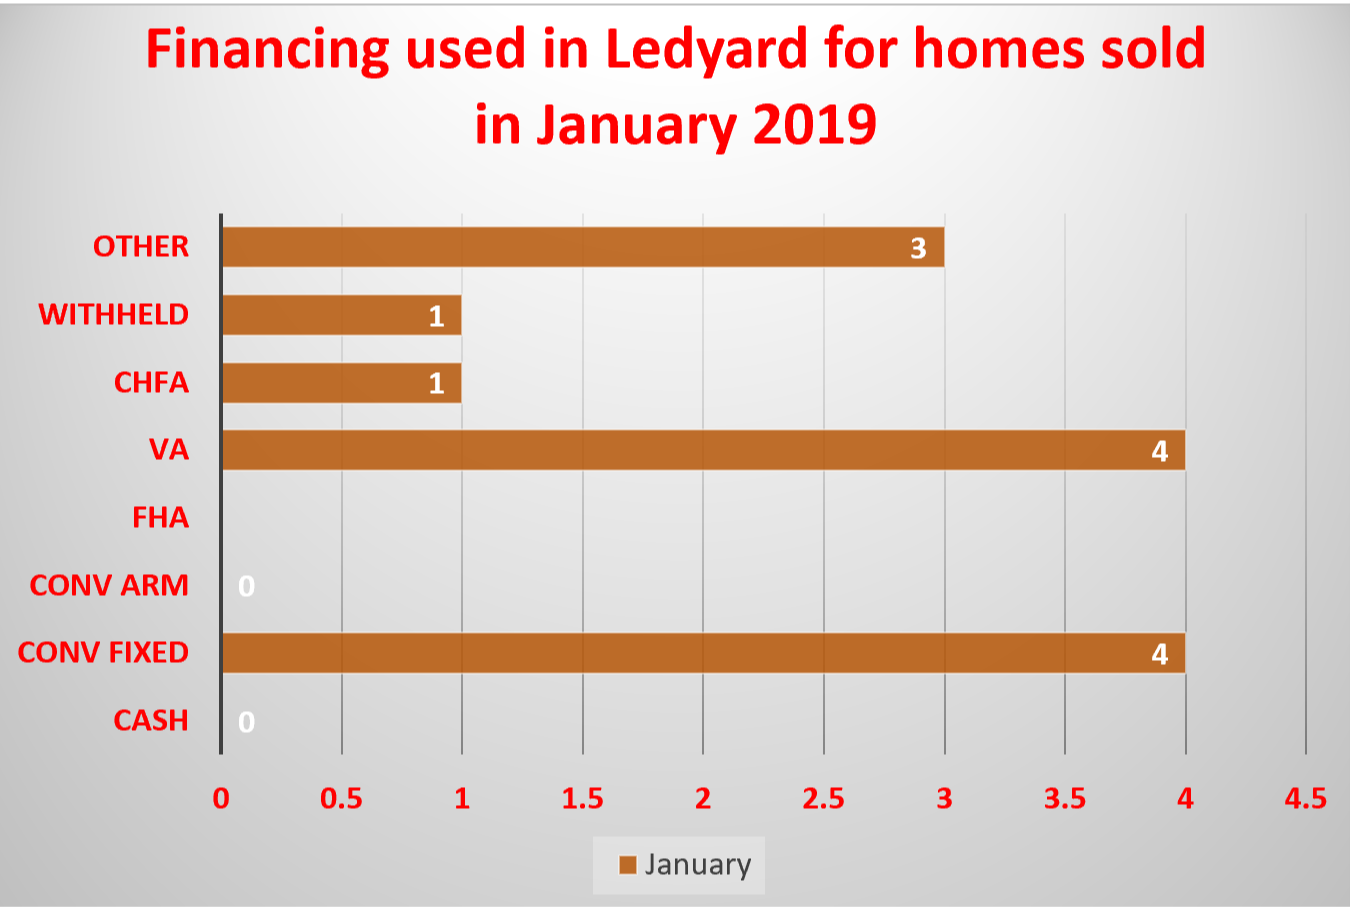 Financing used on Ledyard Homes sold in January 2019 brought to you by Ledyard Realtor Bridget Morrissey